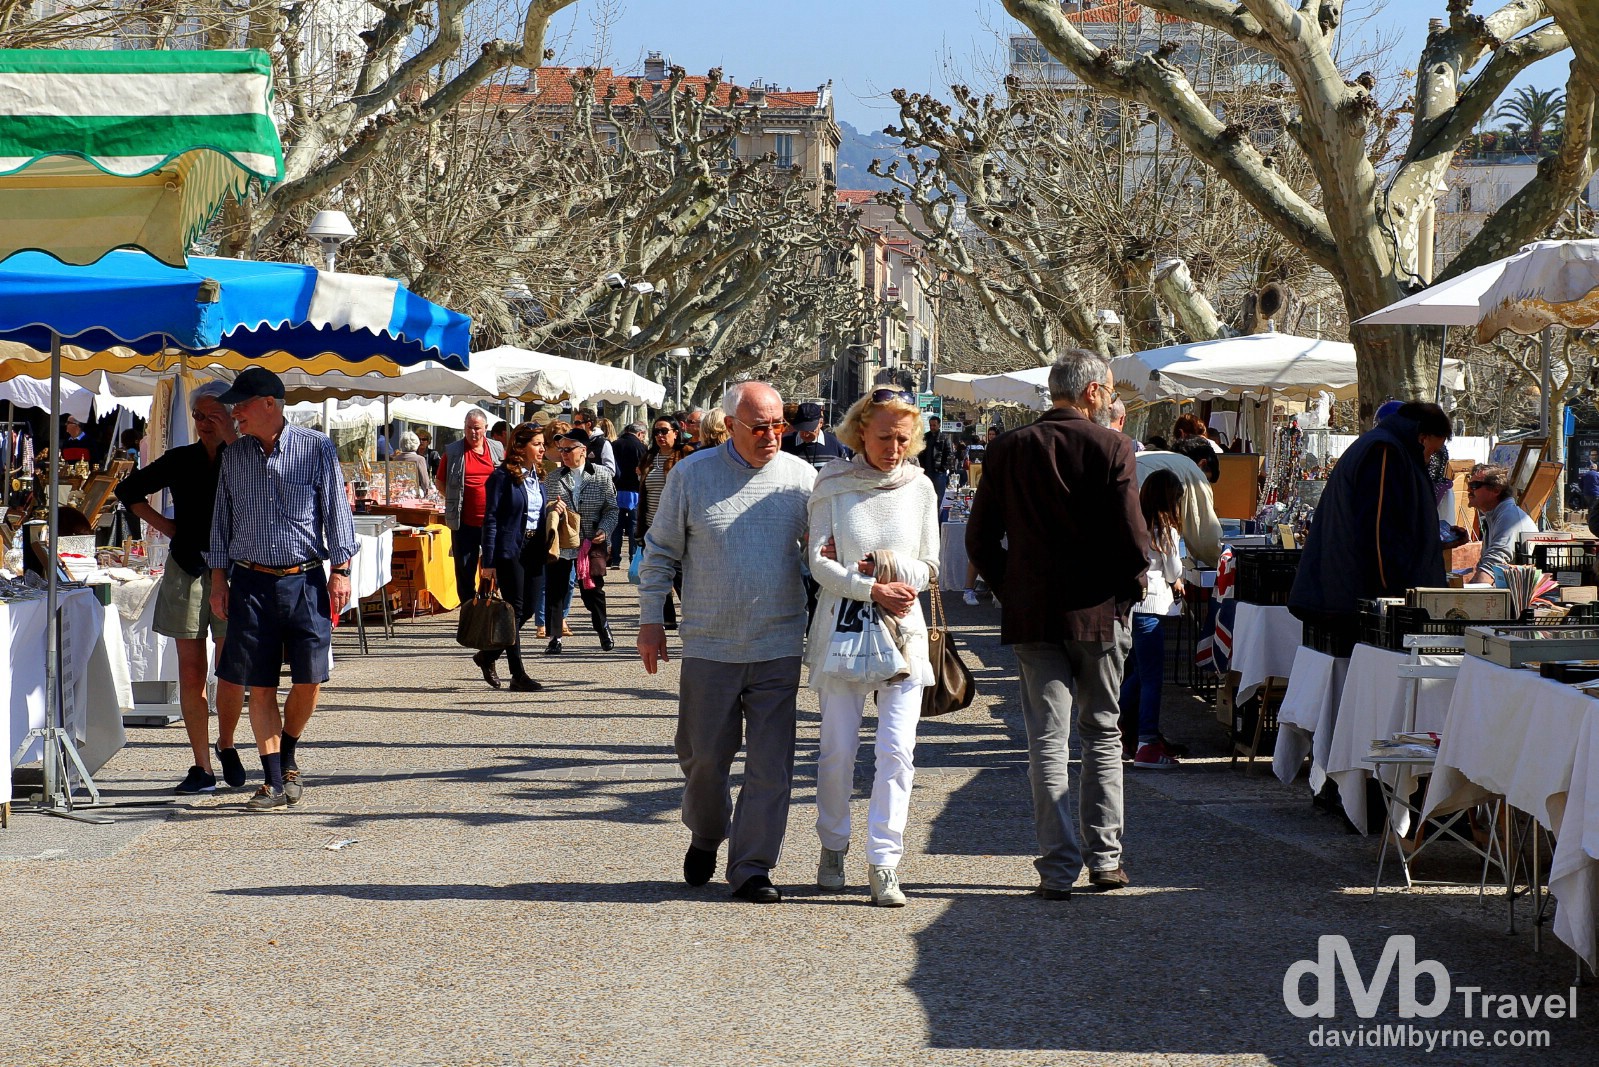 Arts & crafts market in Square Lord Brougham, Cannes, Côte d'Azur, France. March 15th, 2014. 